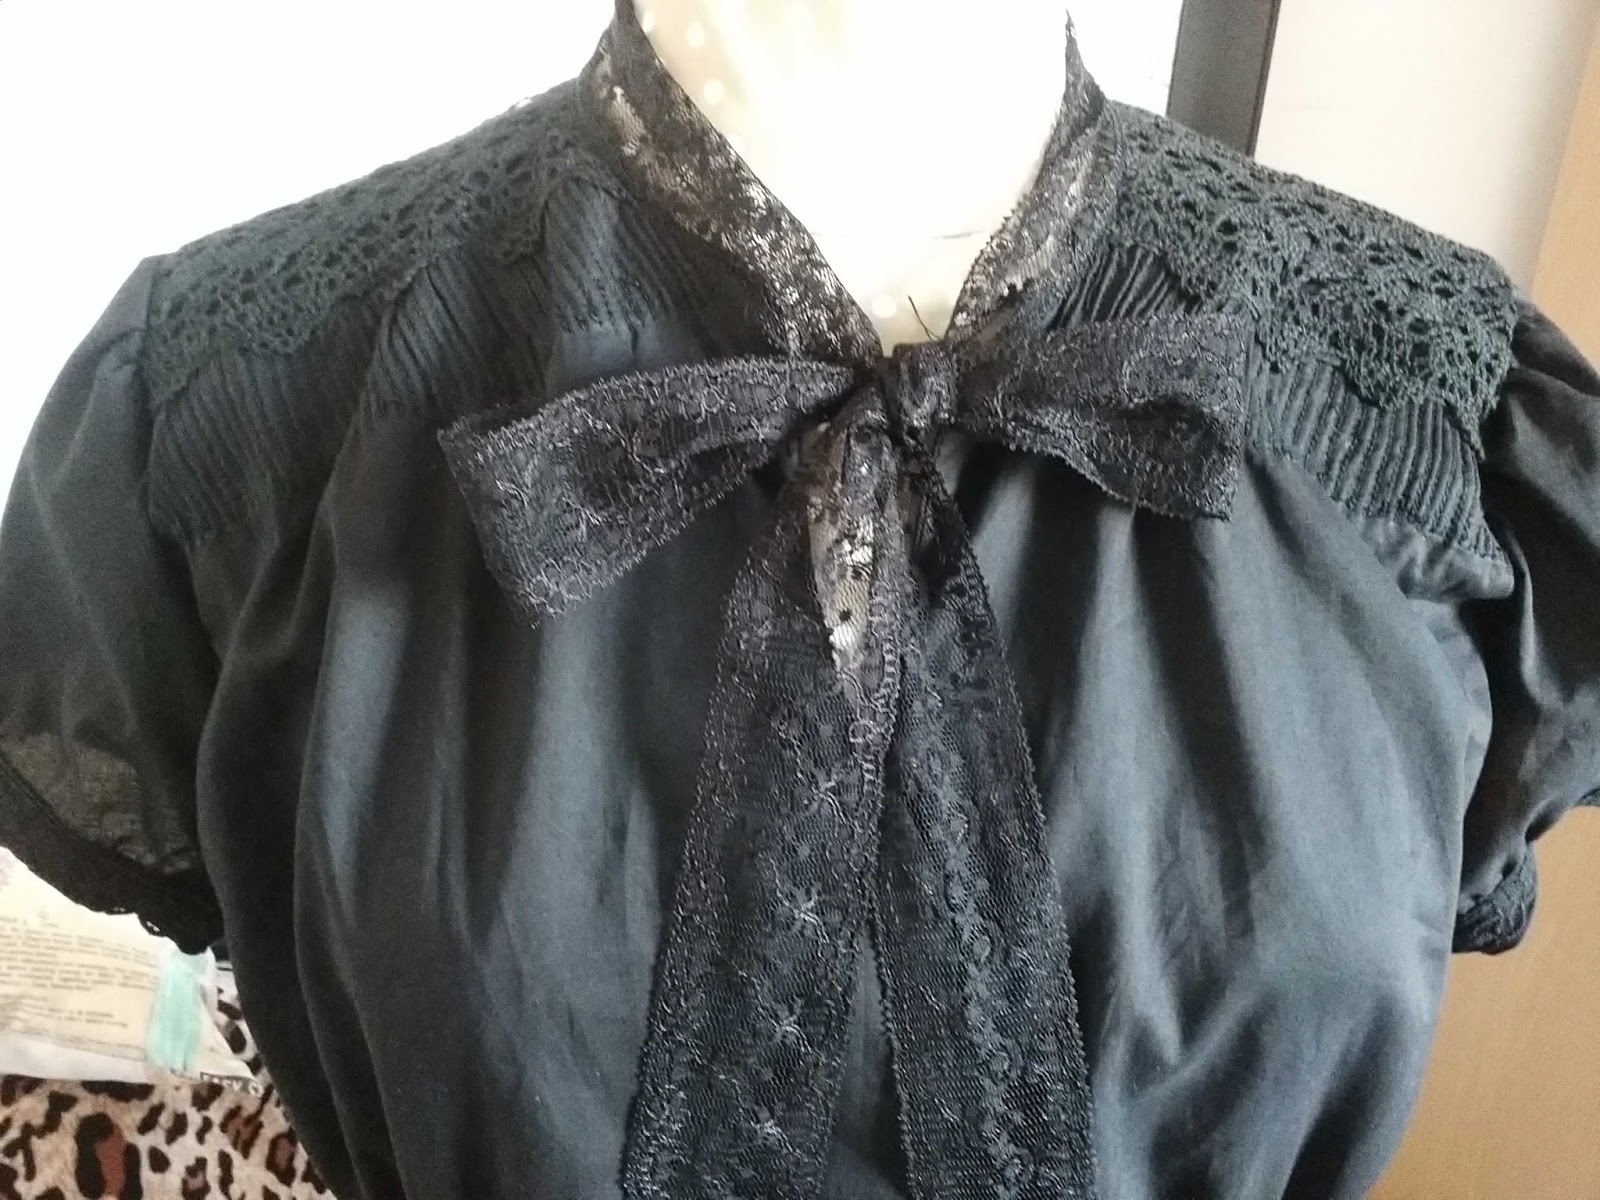 #SewAngelicThreads: How I made My white lace pintucked blouse